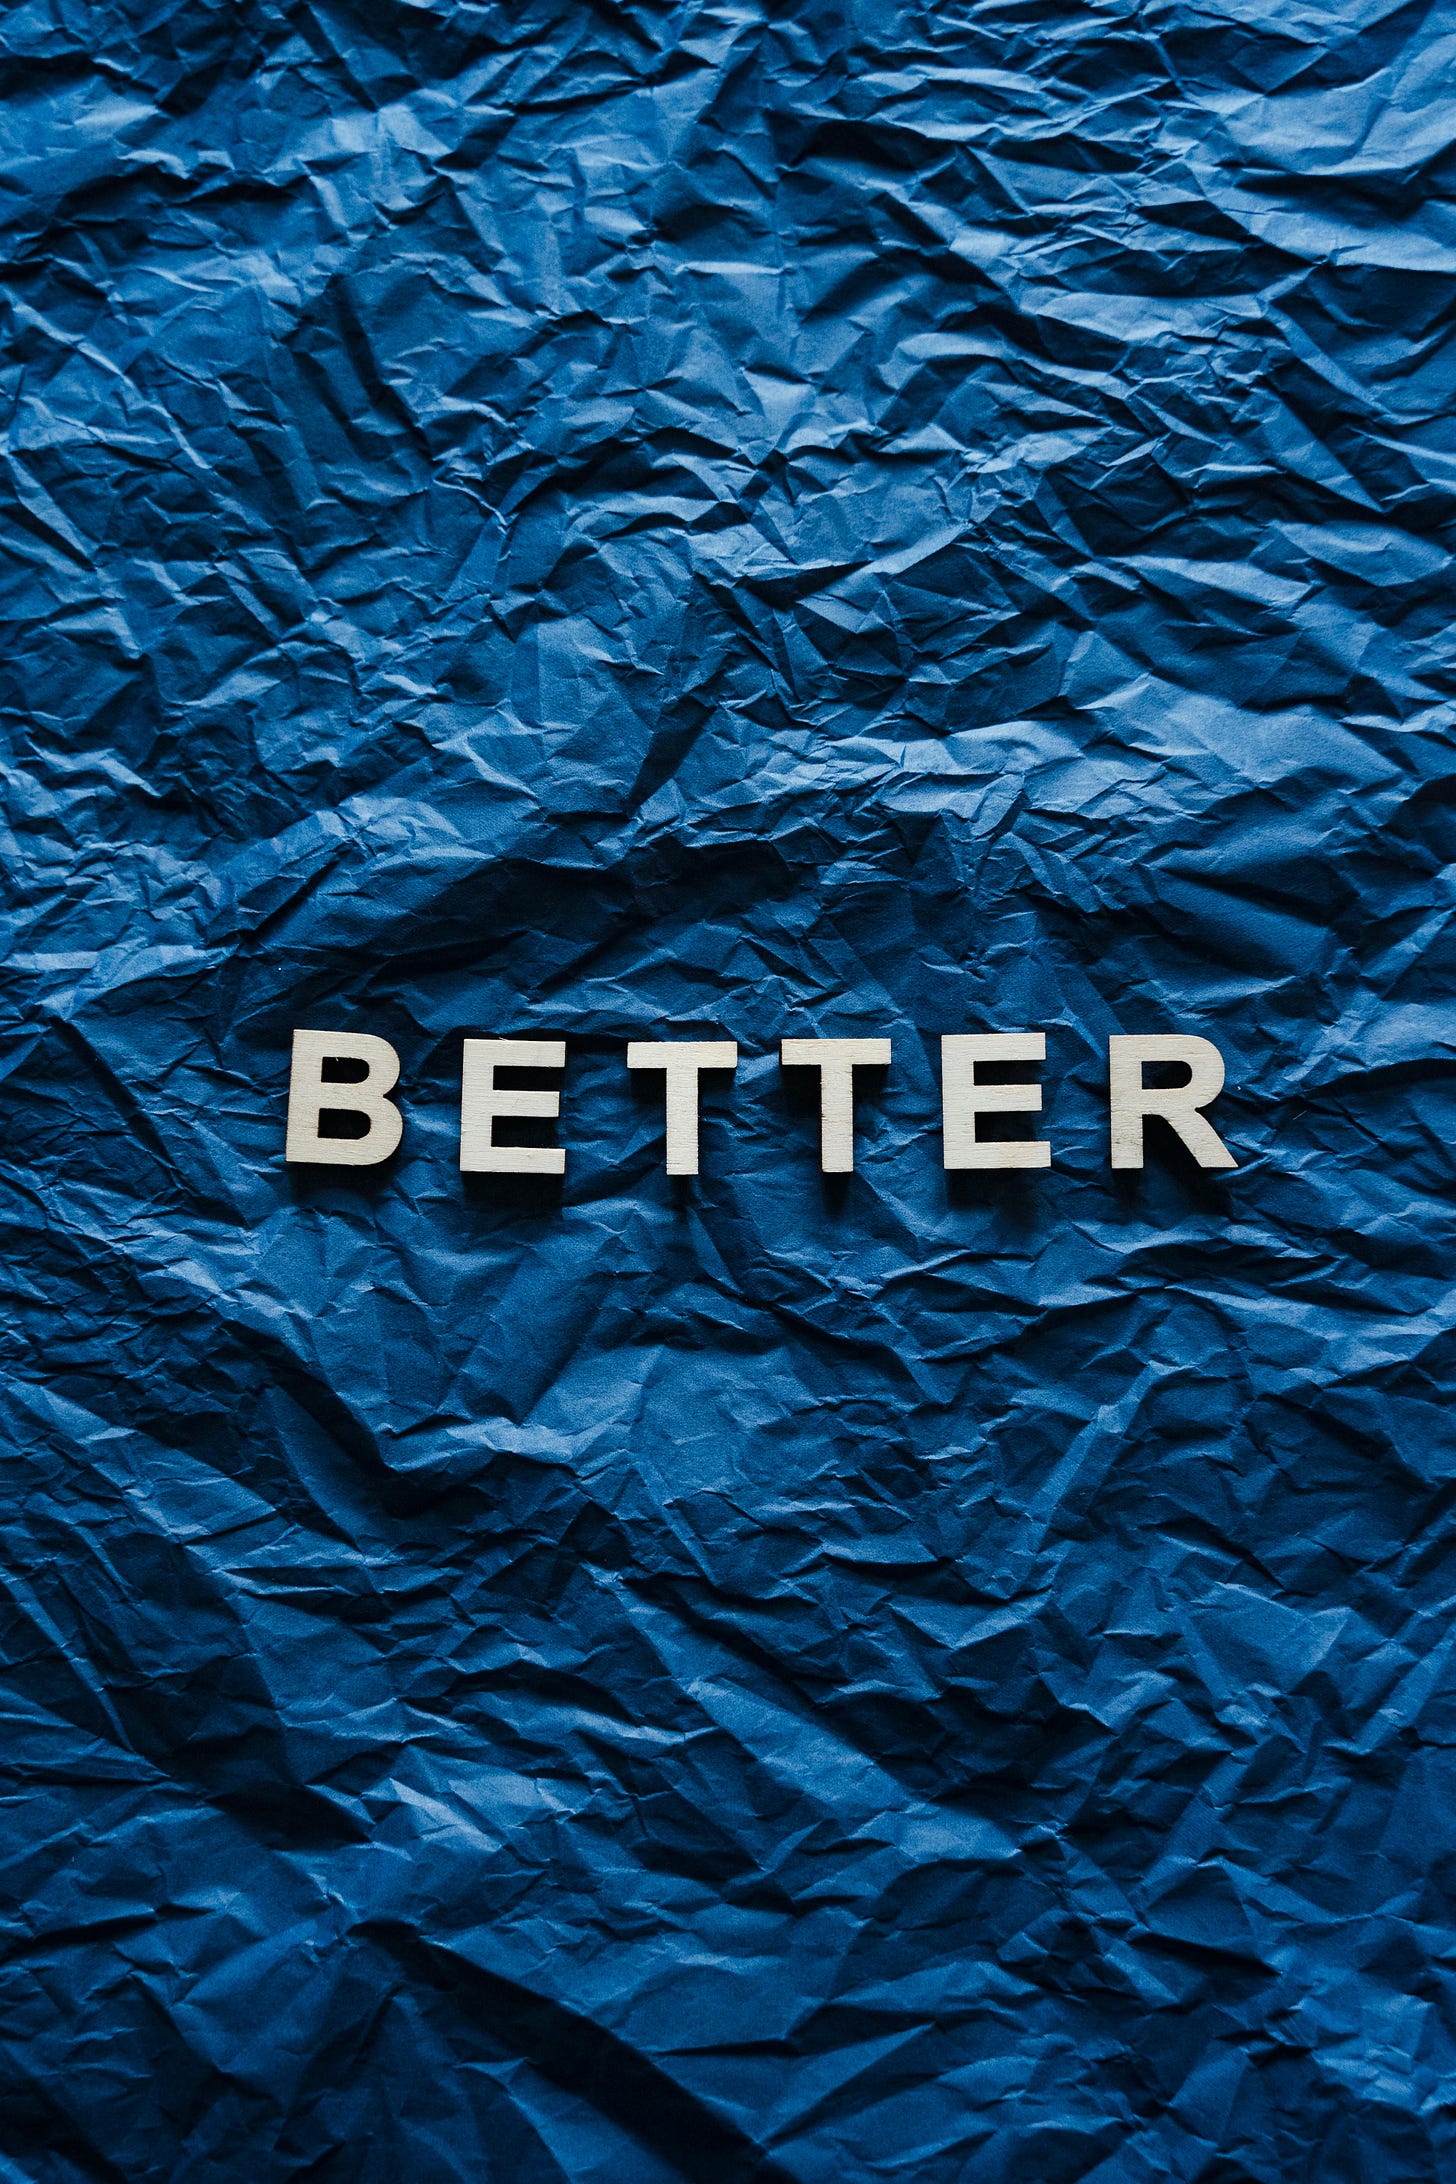 The word Better on a dark blue background of crinkled paper.